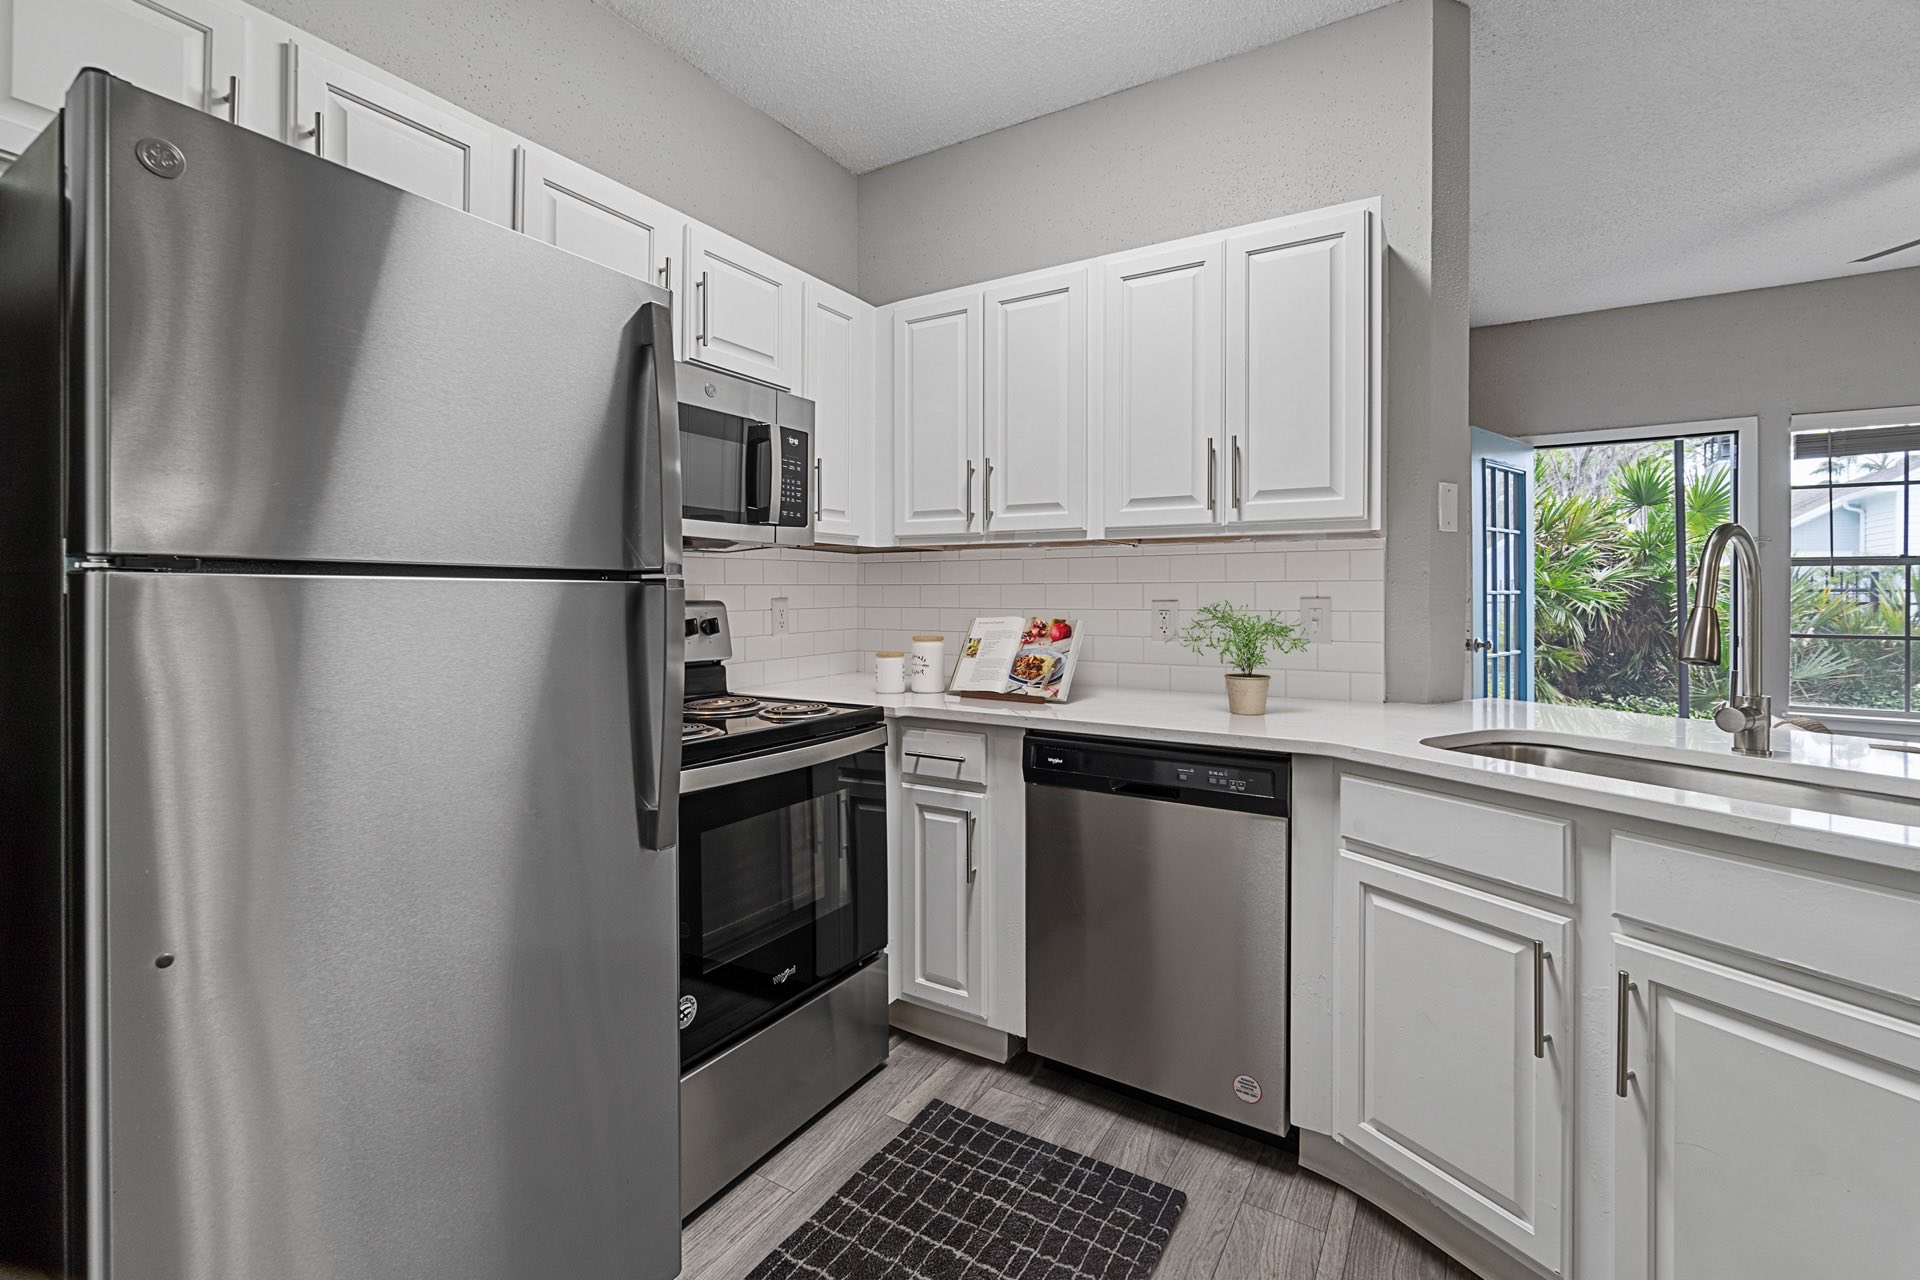 open kitchen with stainless steel appliances, and updated cabinets and hardware